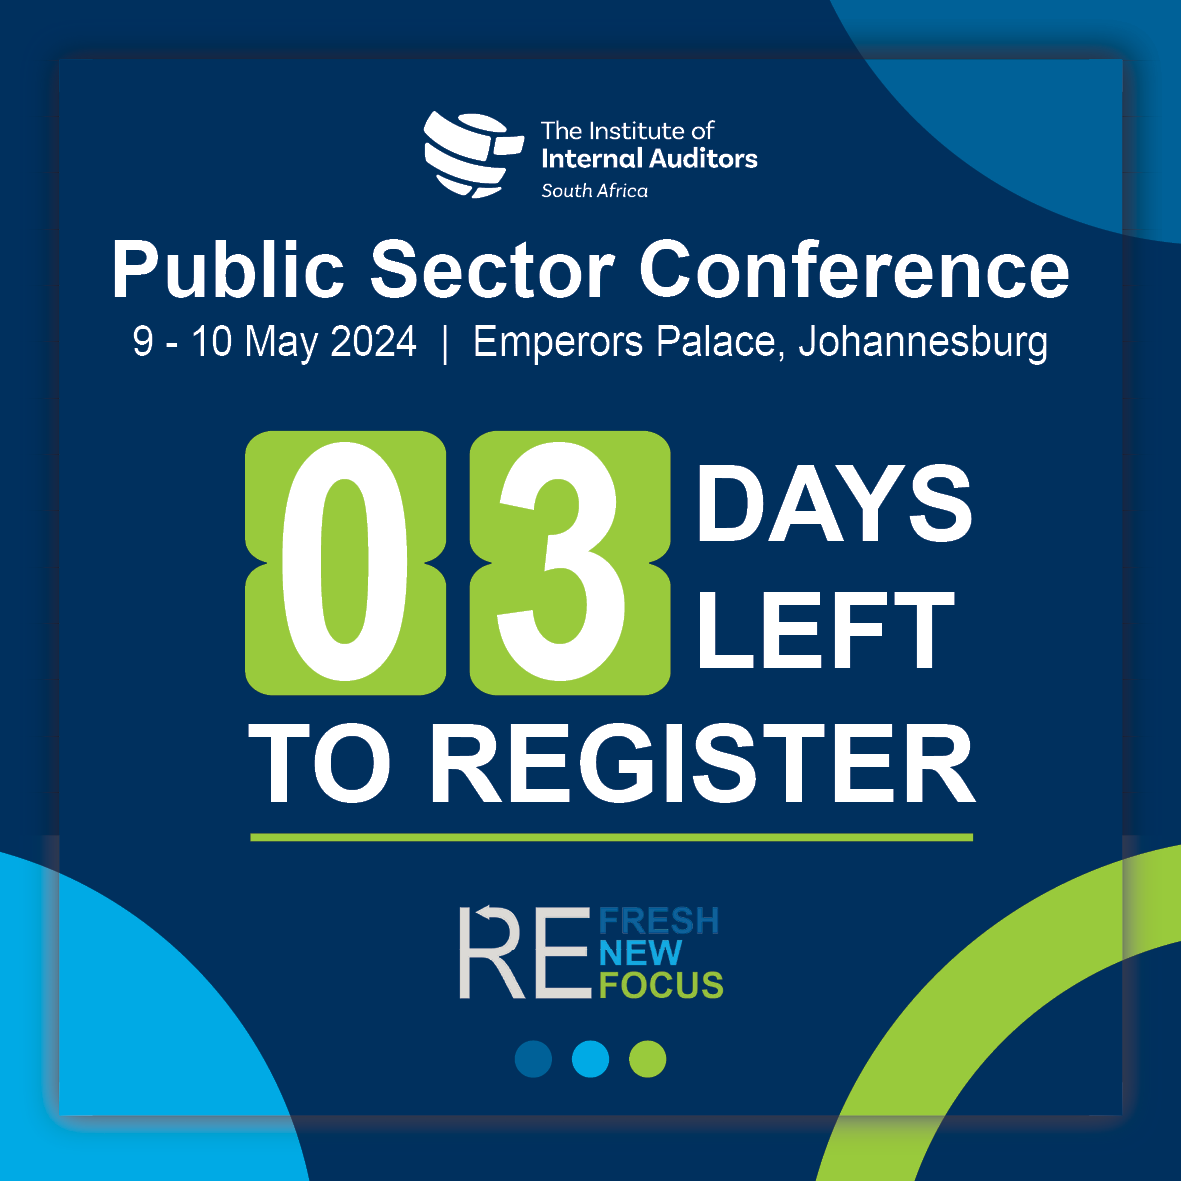 Only 3 days left to secure your spot at the Public Sector Conference 2024! 

Register now:  tinyurl.com/59vtknbf

#publicsectorconference #refreshrenewrefocus #iiasa #internalaudit #publicsector